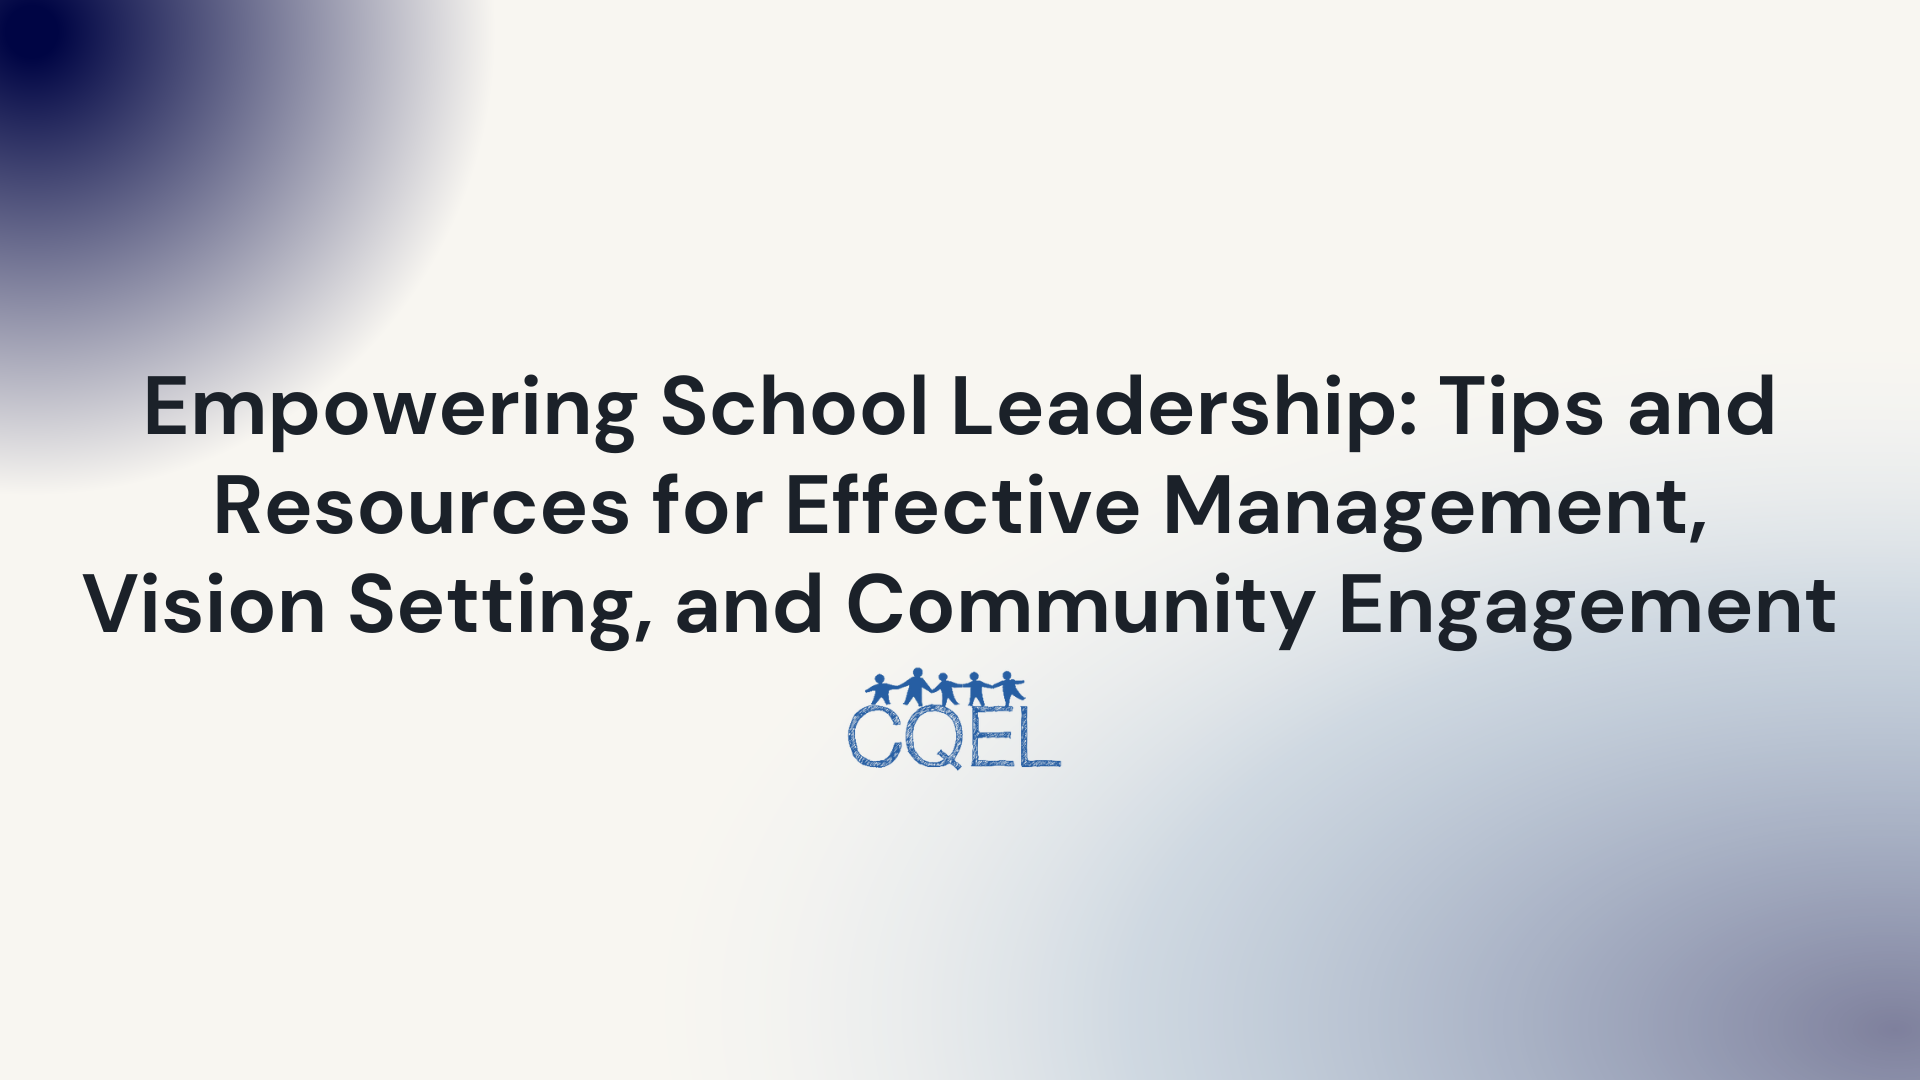 Empowering School Leadership: Tips and Resources for Effective Management, Vision Setting, and Community Engagement